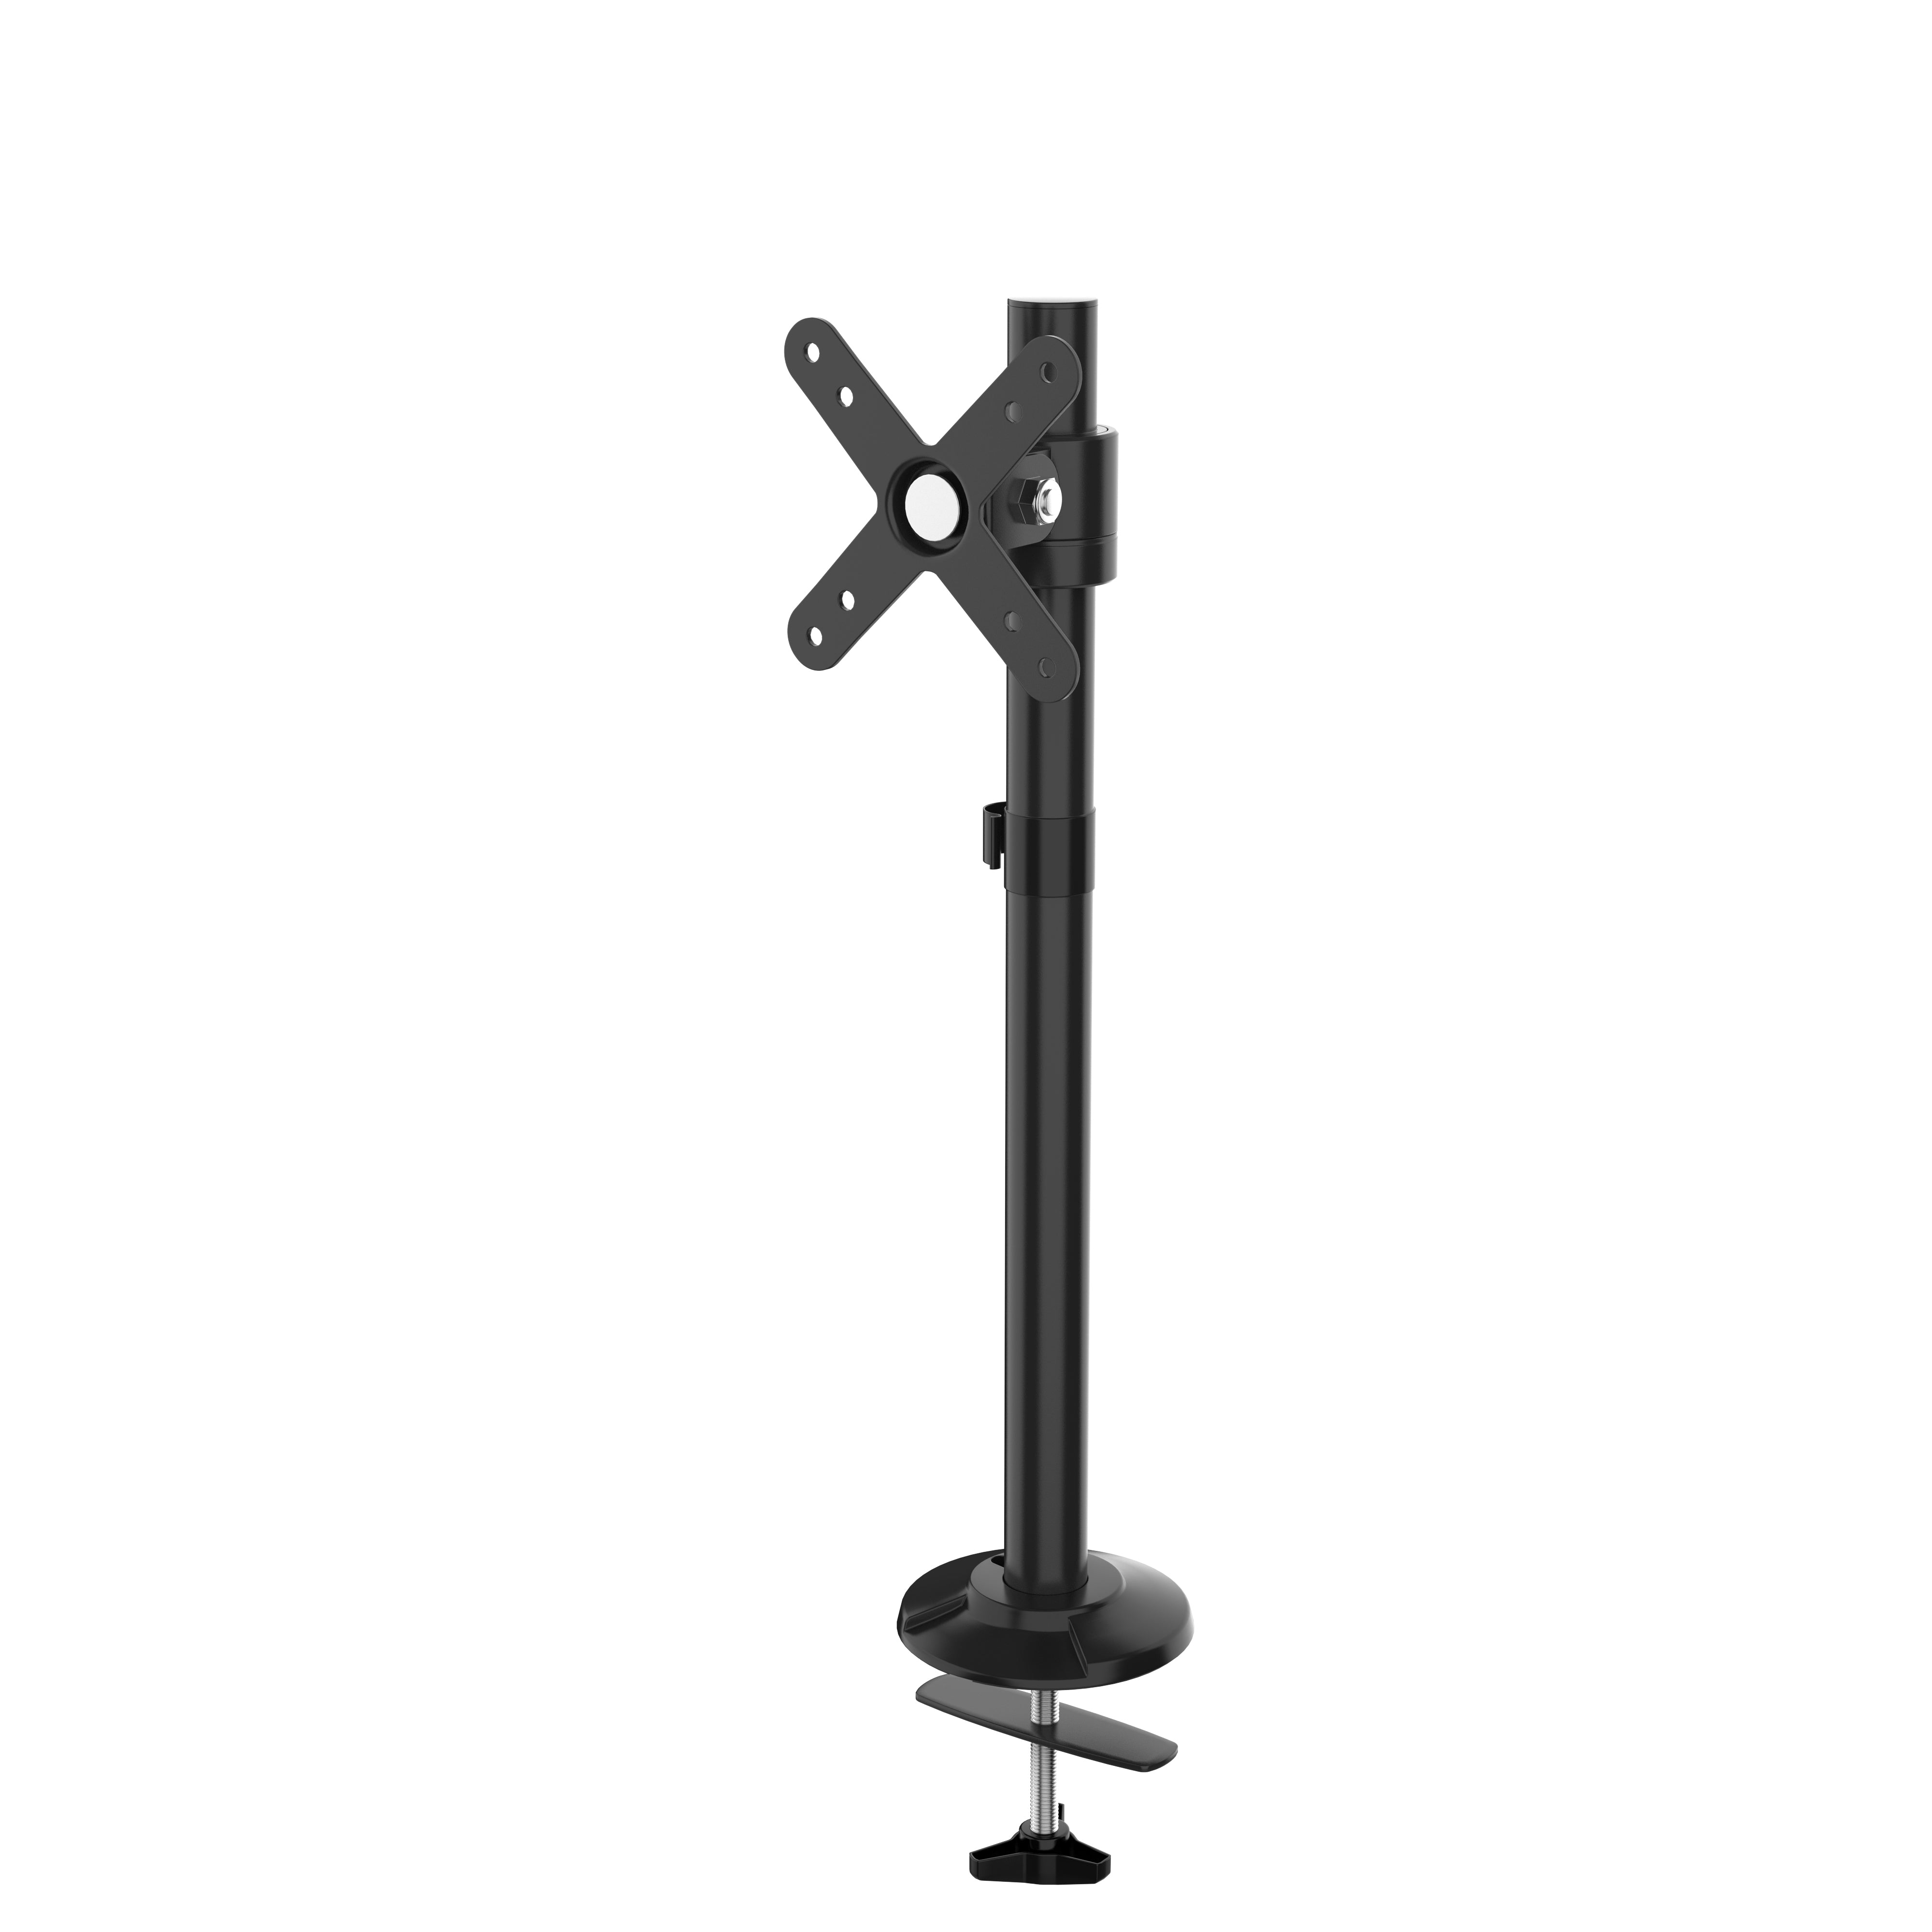 Articulating Monitor Arm with Clamp and Grommet